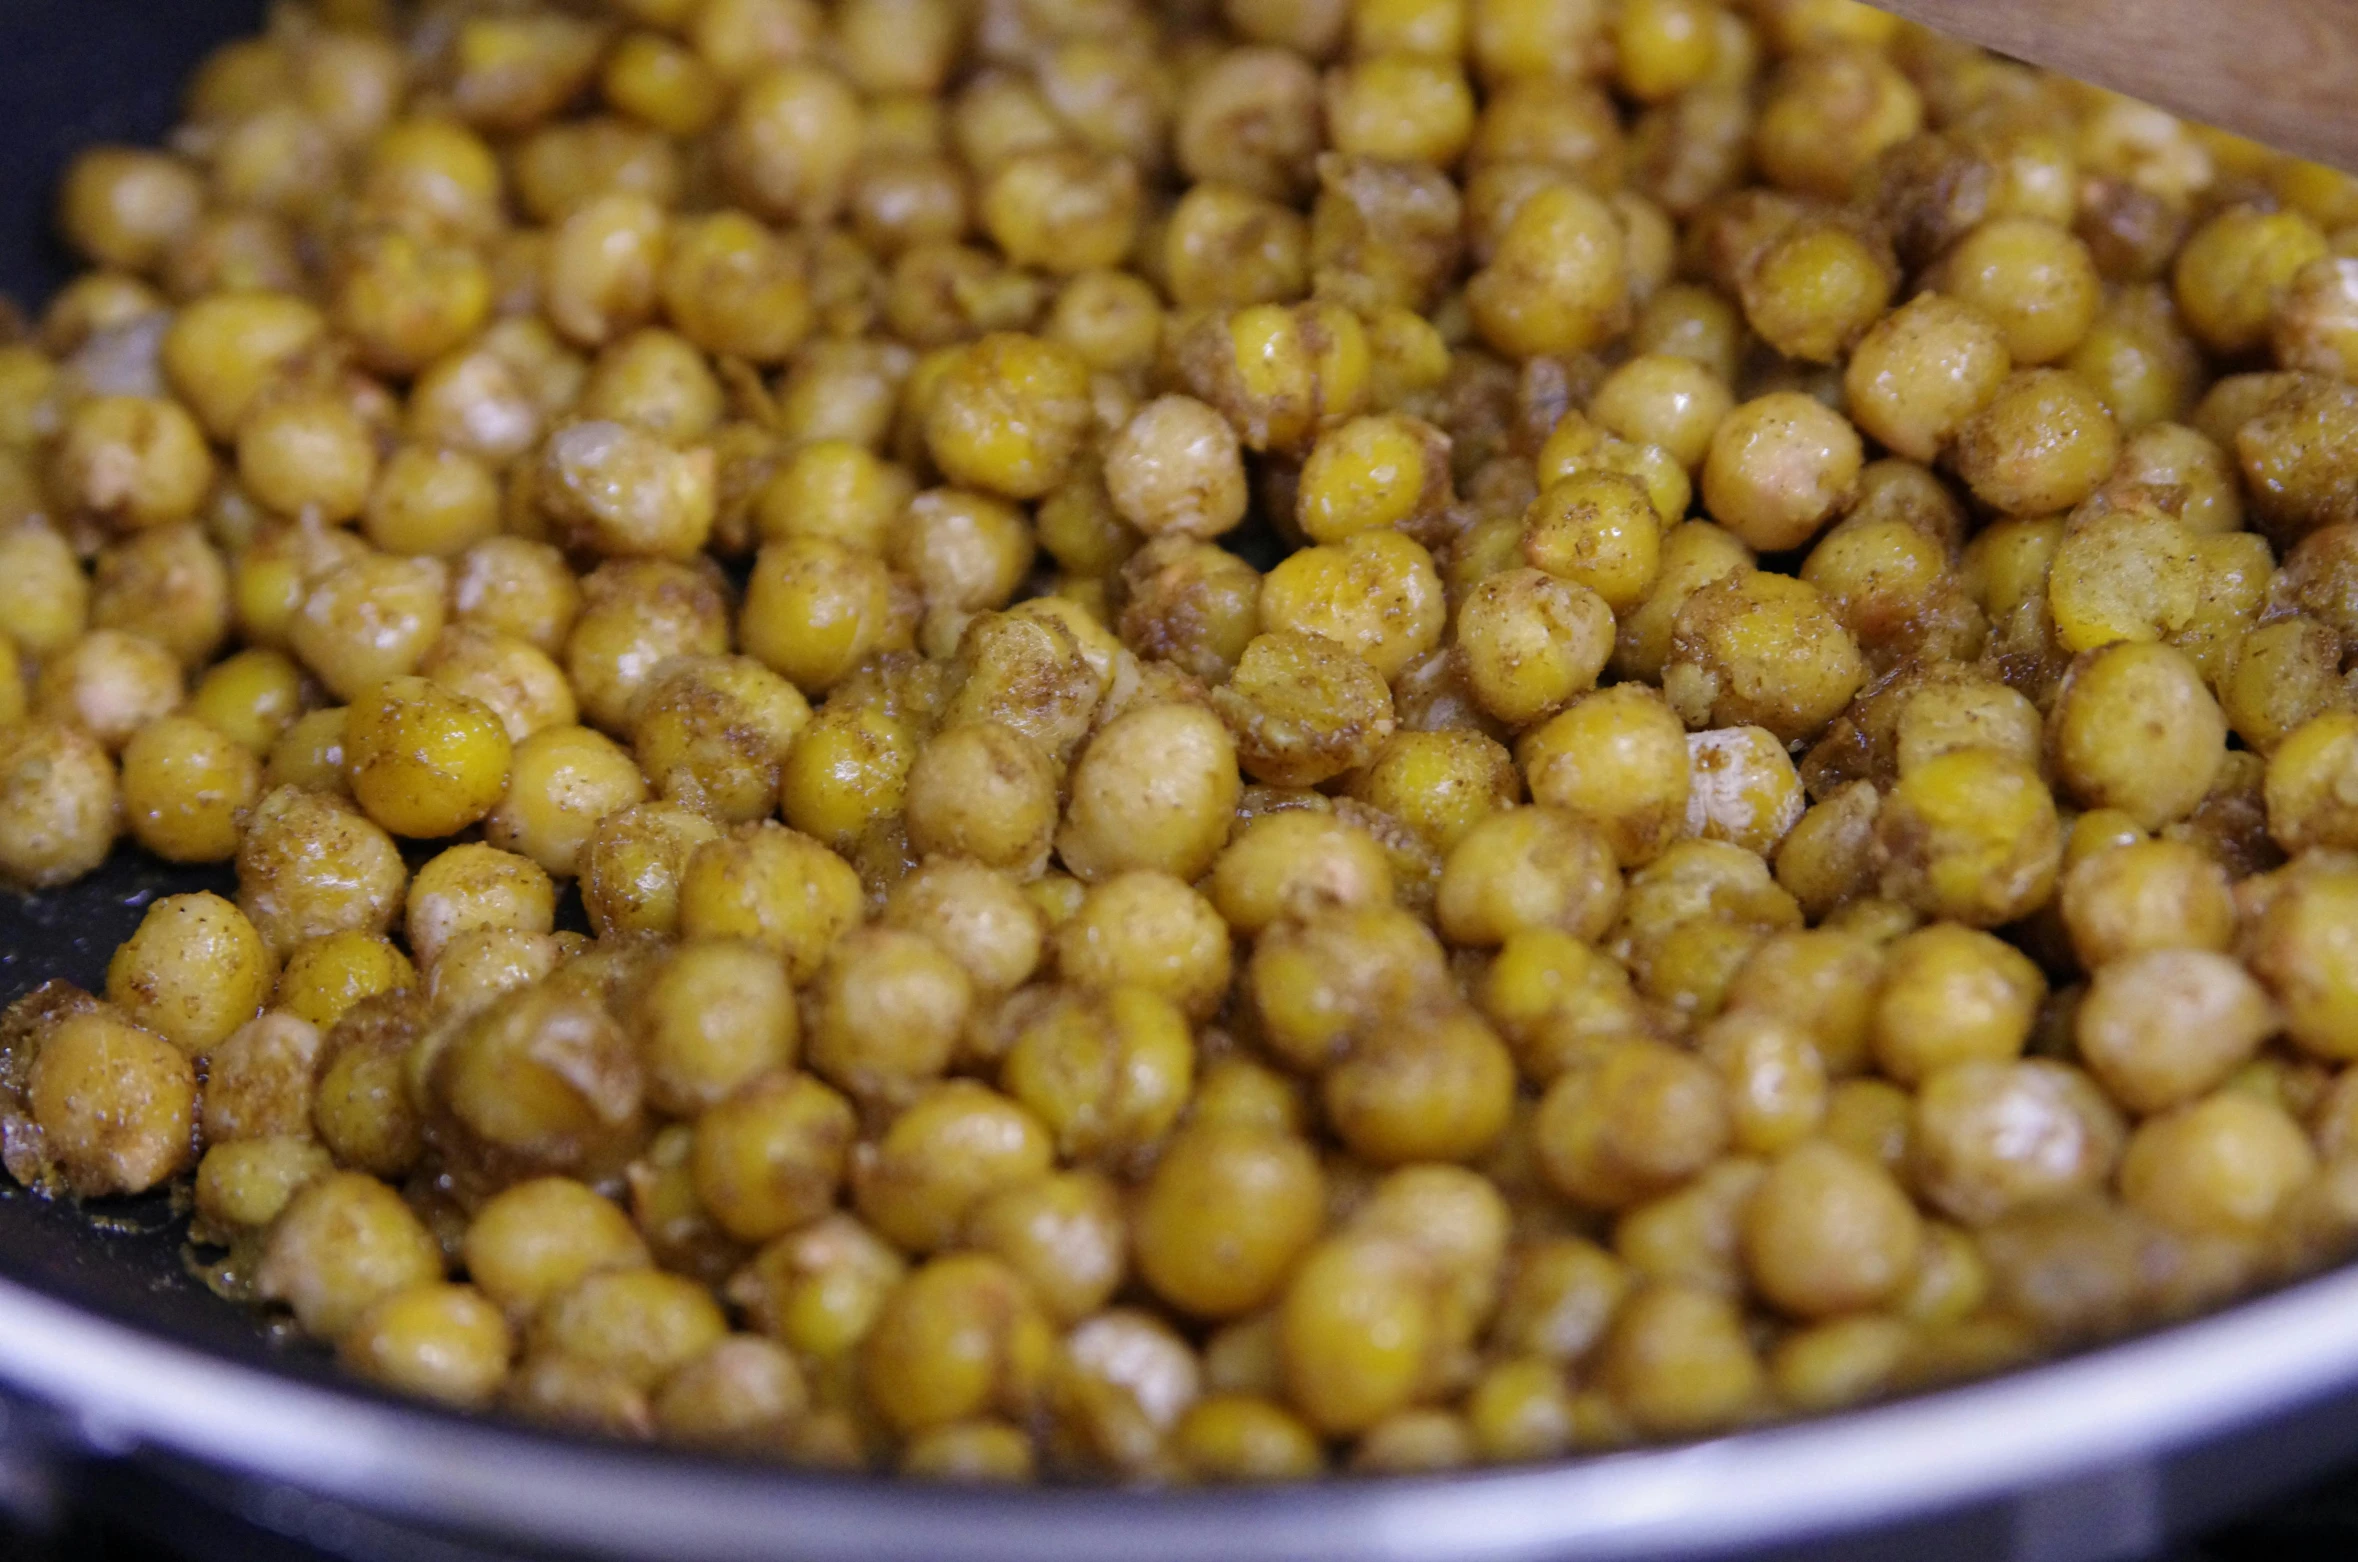 a frying pan filled with cooked chickpeas, by Matt Cavotta, dynamic closeup, some zoomed in shots, mustard, skins